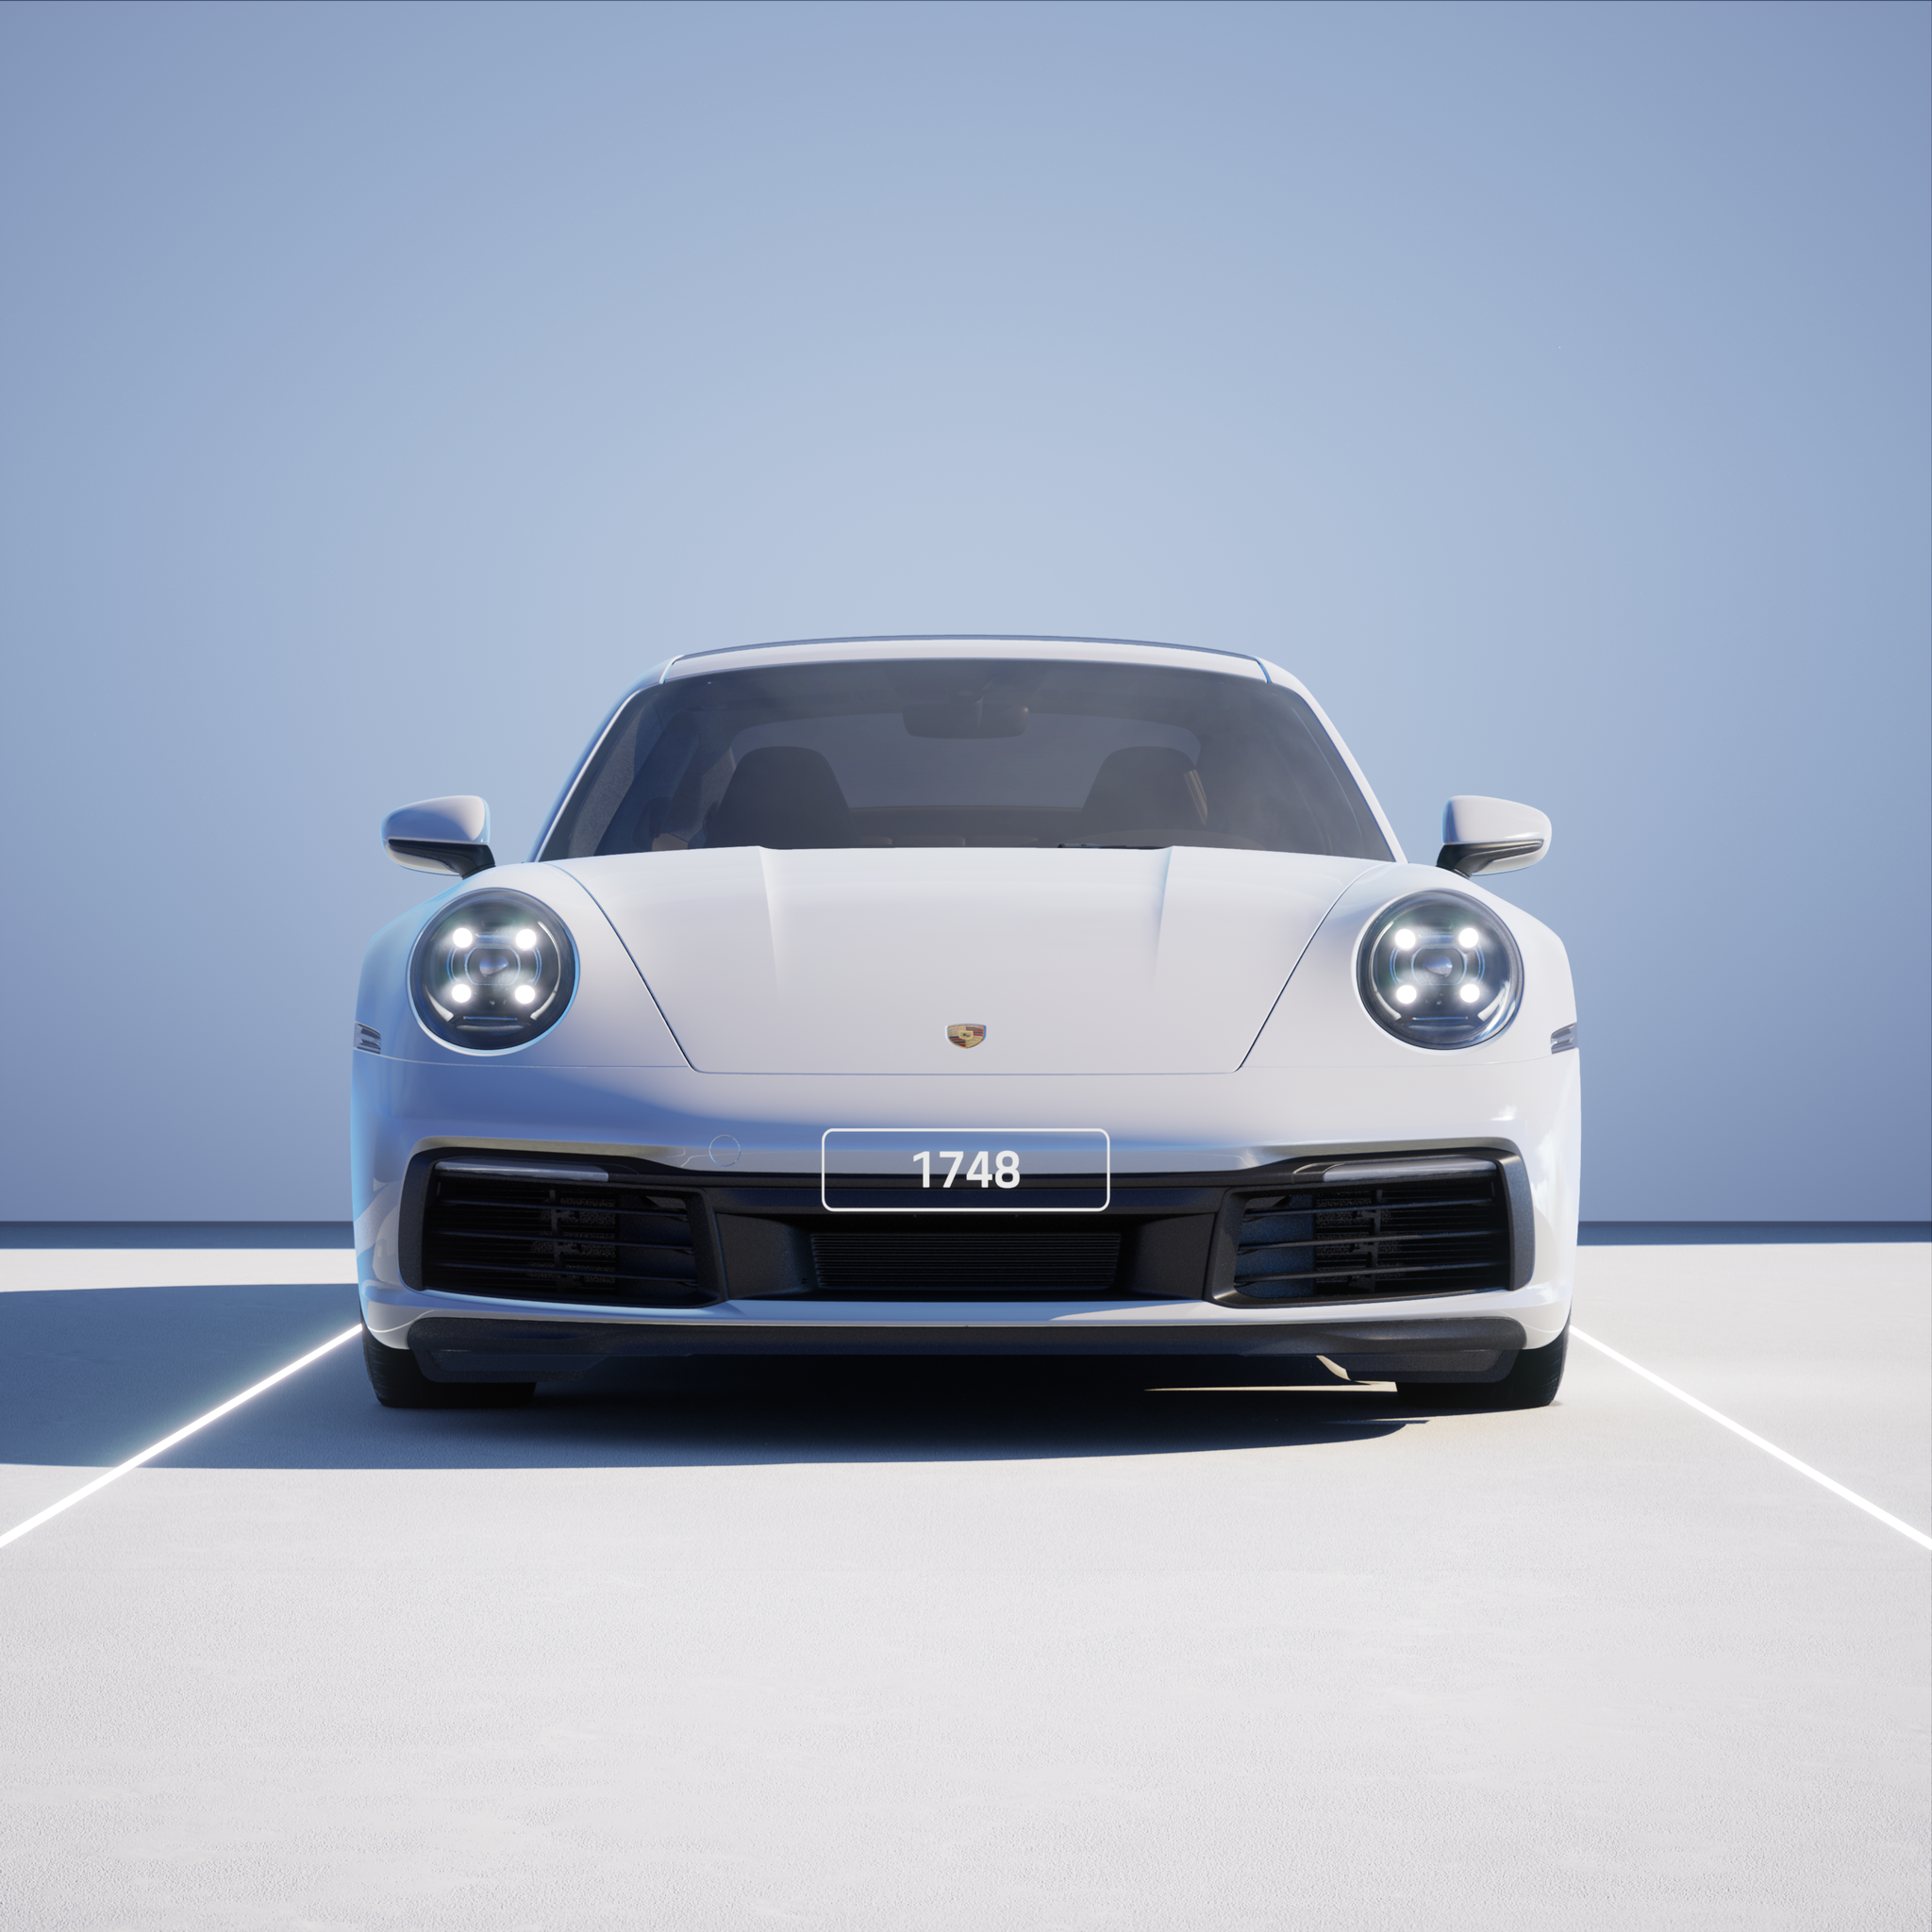 The PORSCHΞ 911 1748 image in phase